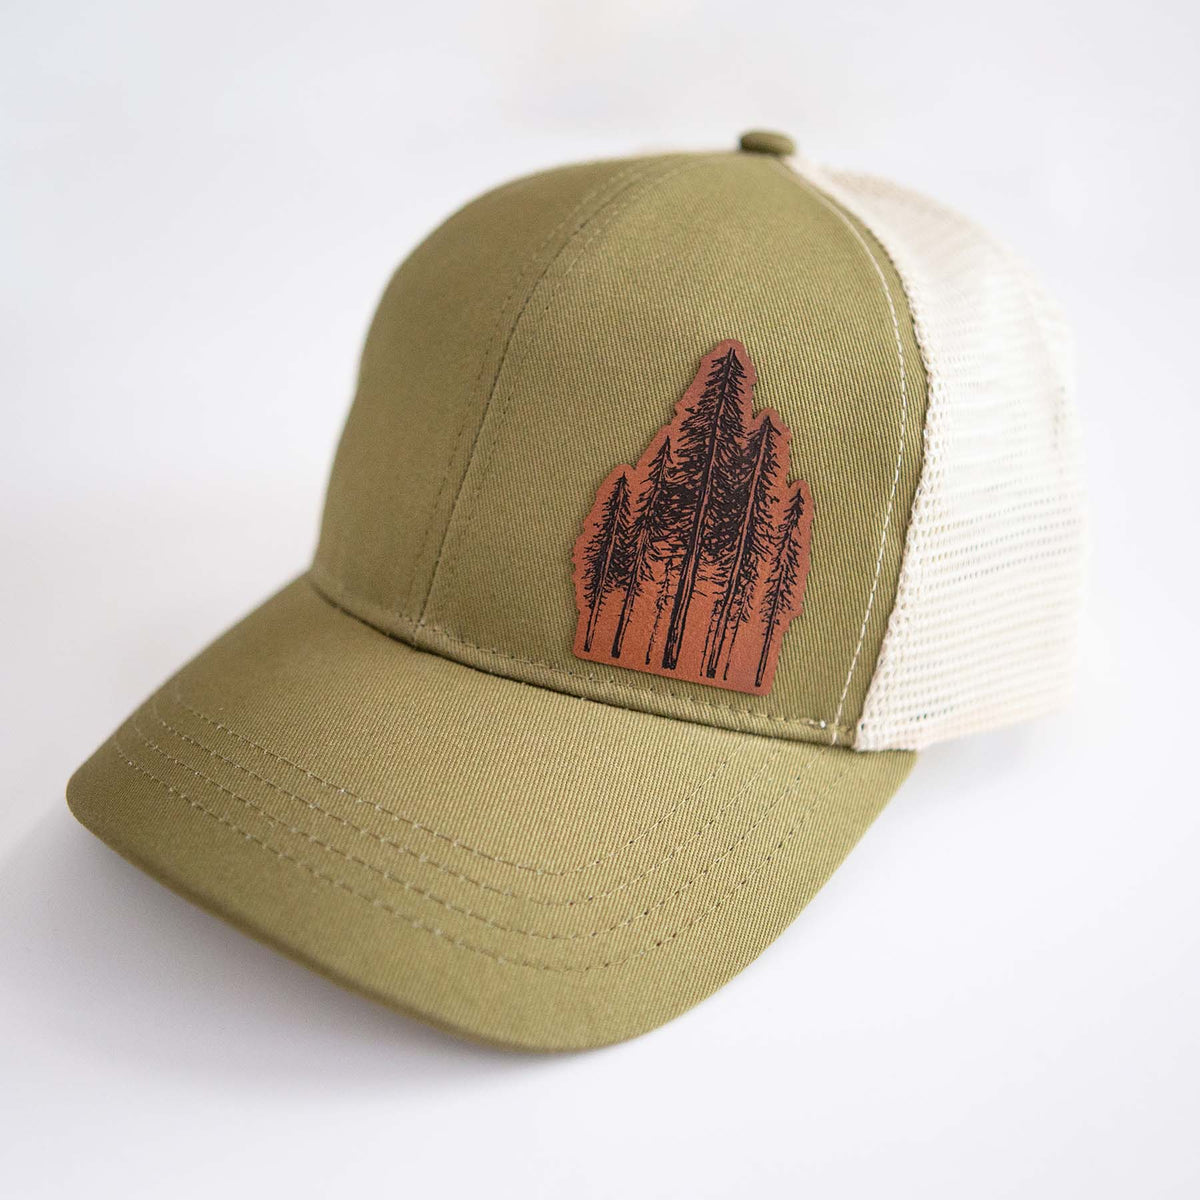 Evergreen - Eco Trucker Hat - Organic and Recycled